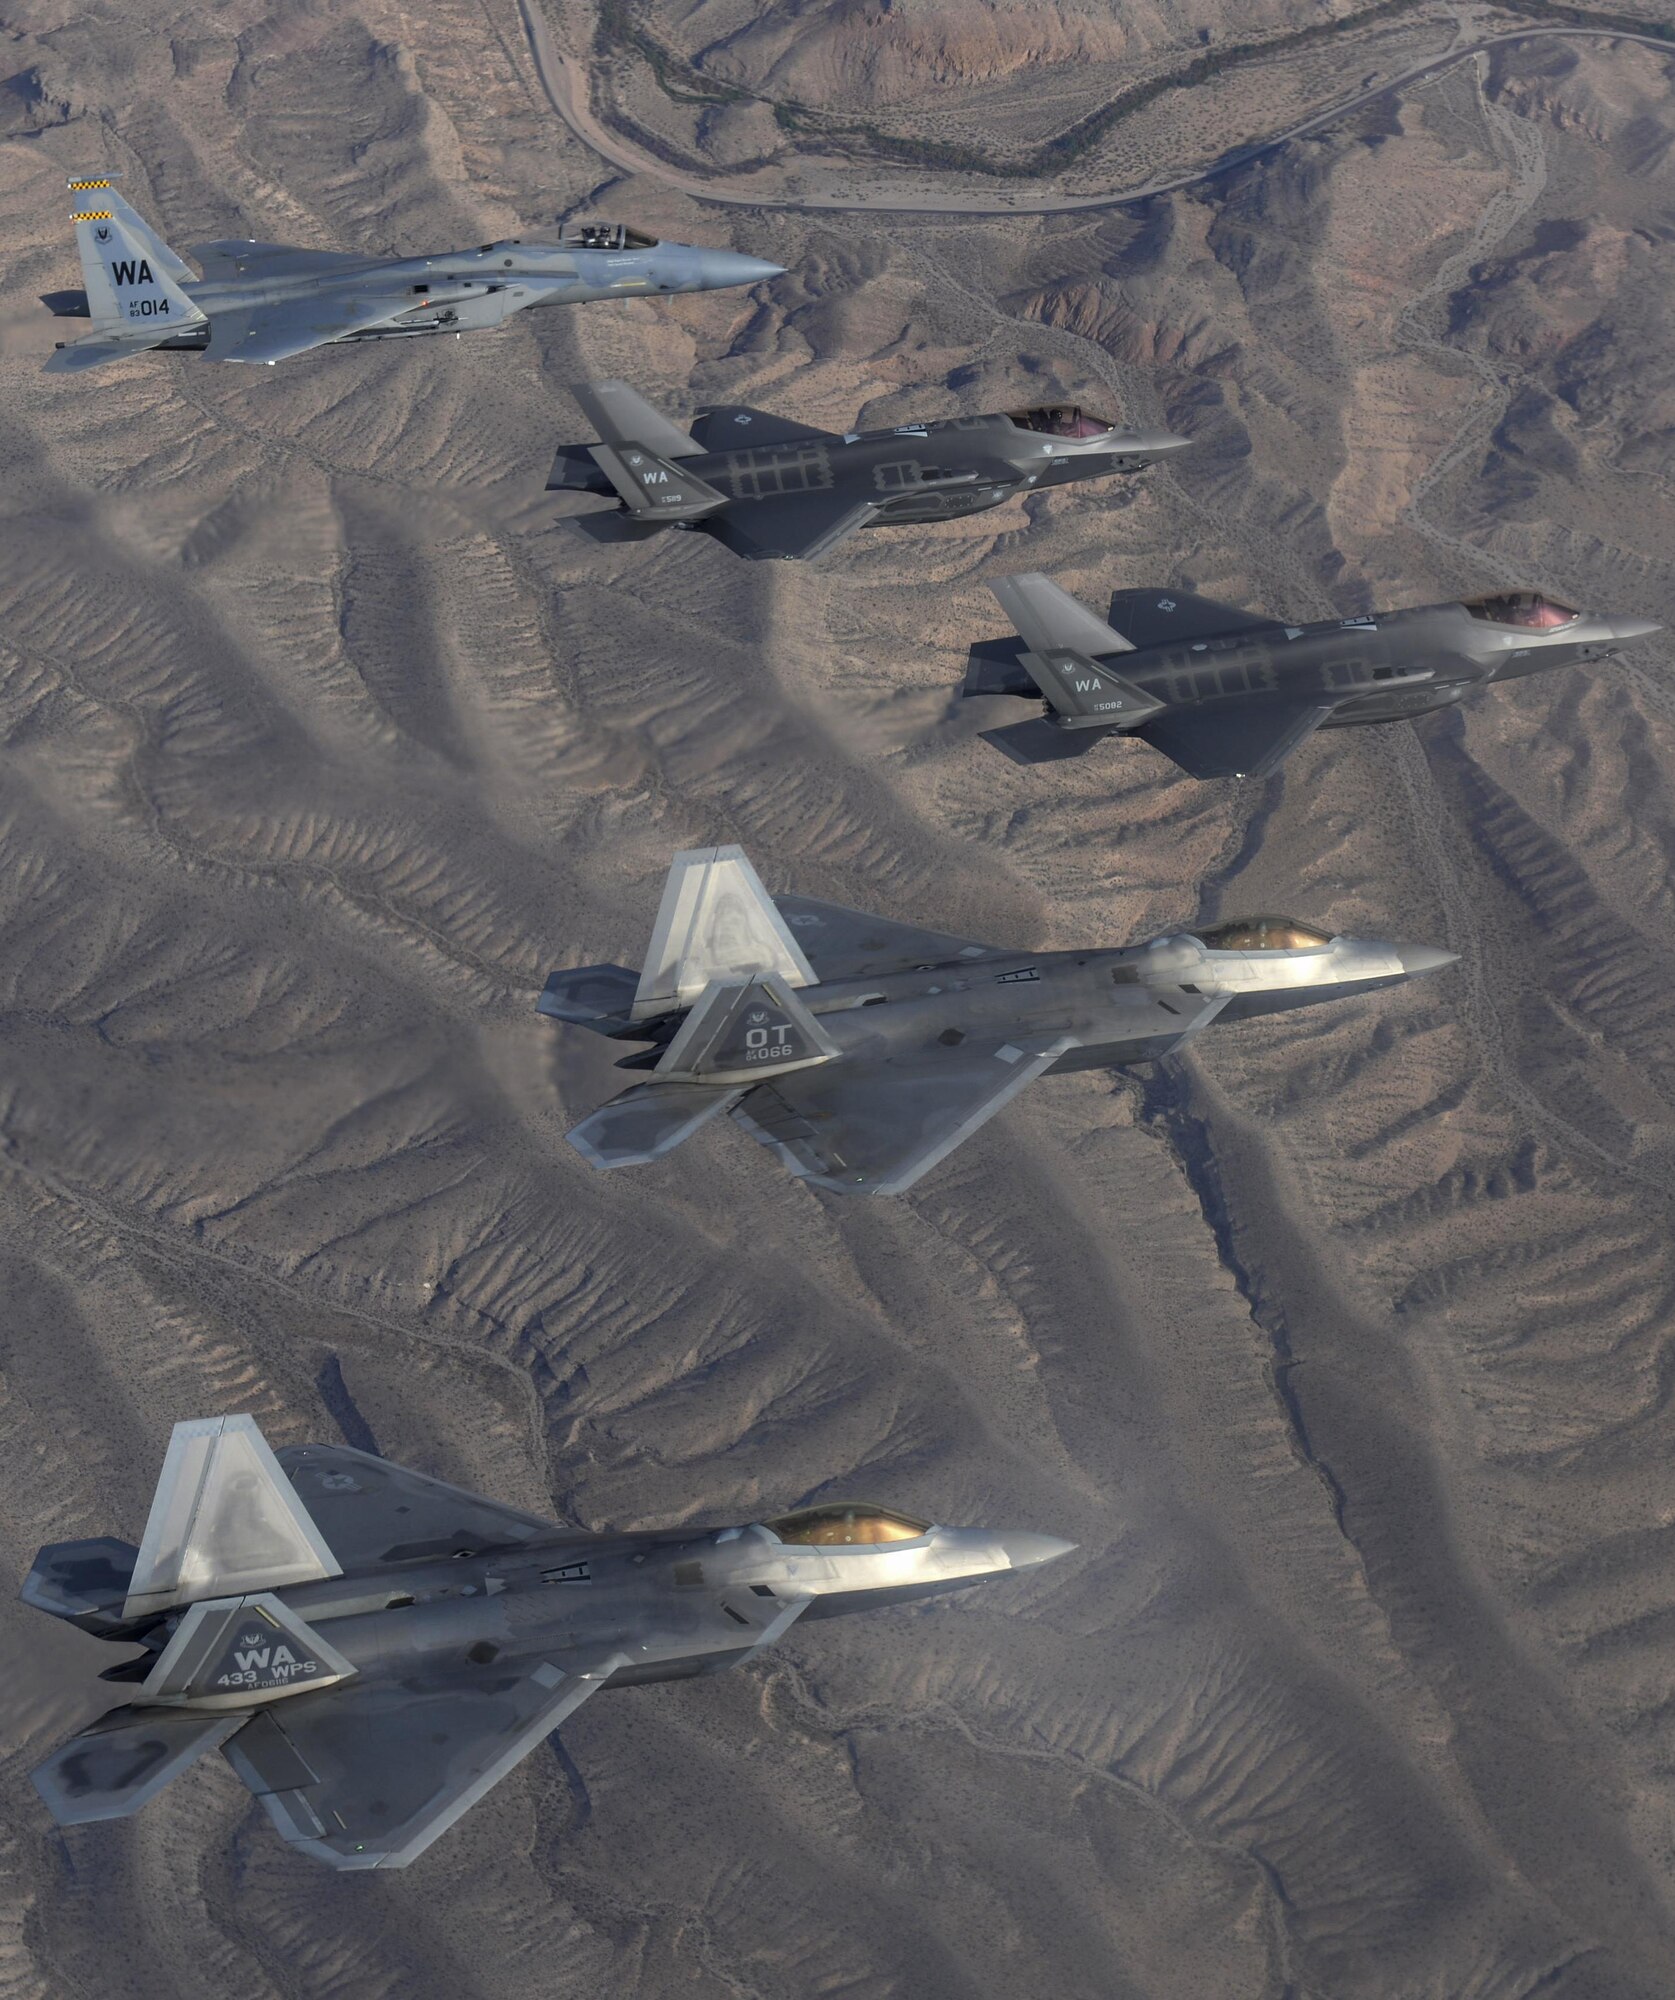 F-35 Lightning II, assigned to the 6th Weapons Squadron, at Nellis Air Force Base, Nevada, F-22 Raptor and an F-15 fighter jets, assigned to the 433rd Weapons Squadron, at Nellis Air Force Base, Nevada, fly in formation over the Nevada Test and Training Range July 10, 2017. The United States Air Force Weapons School teaches graduate-level instructor courses that provide the world's most advanced training in weapons and tactics employment to officers of the combat air forces and mobility air forces. (U.S. Air Force photo by Staff Sgt. Daryn Murphy/Released)